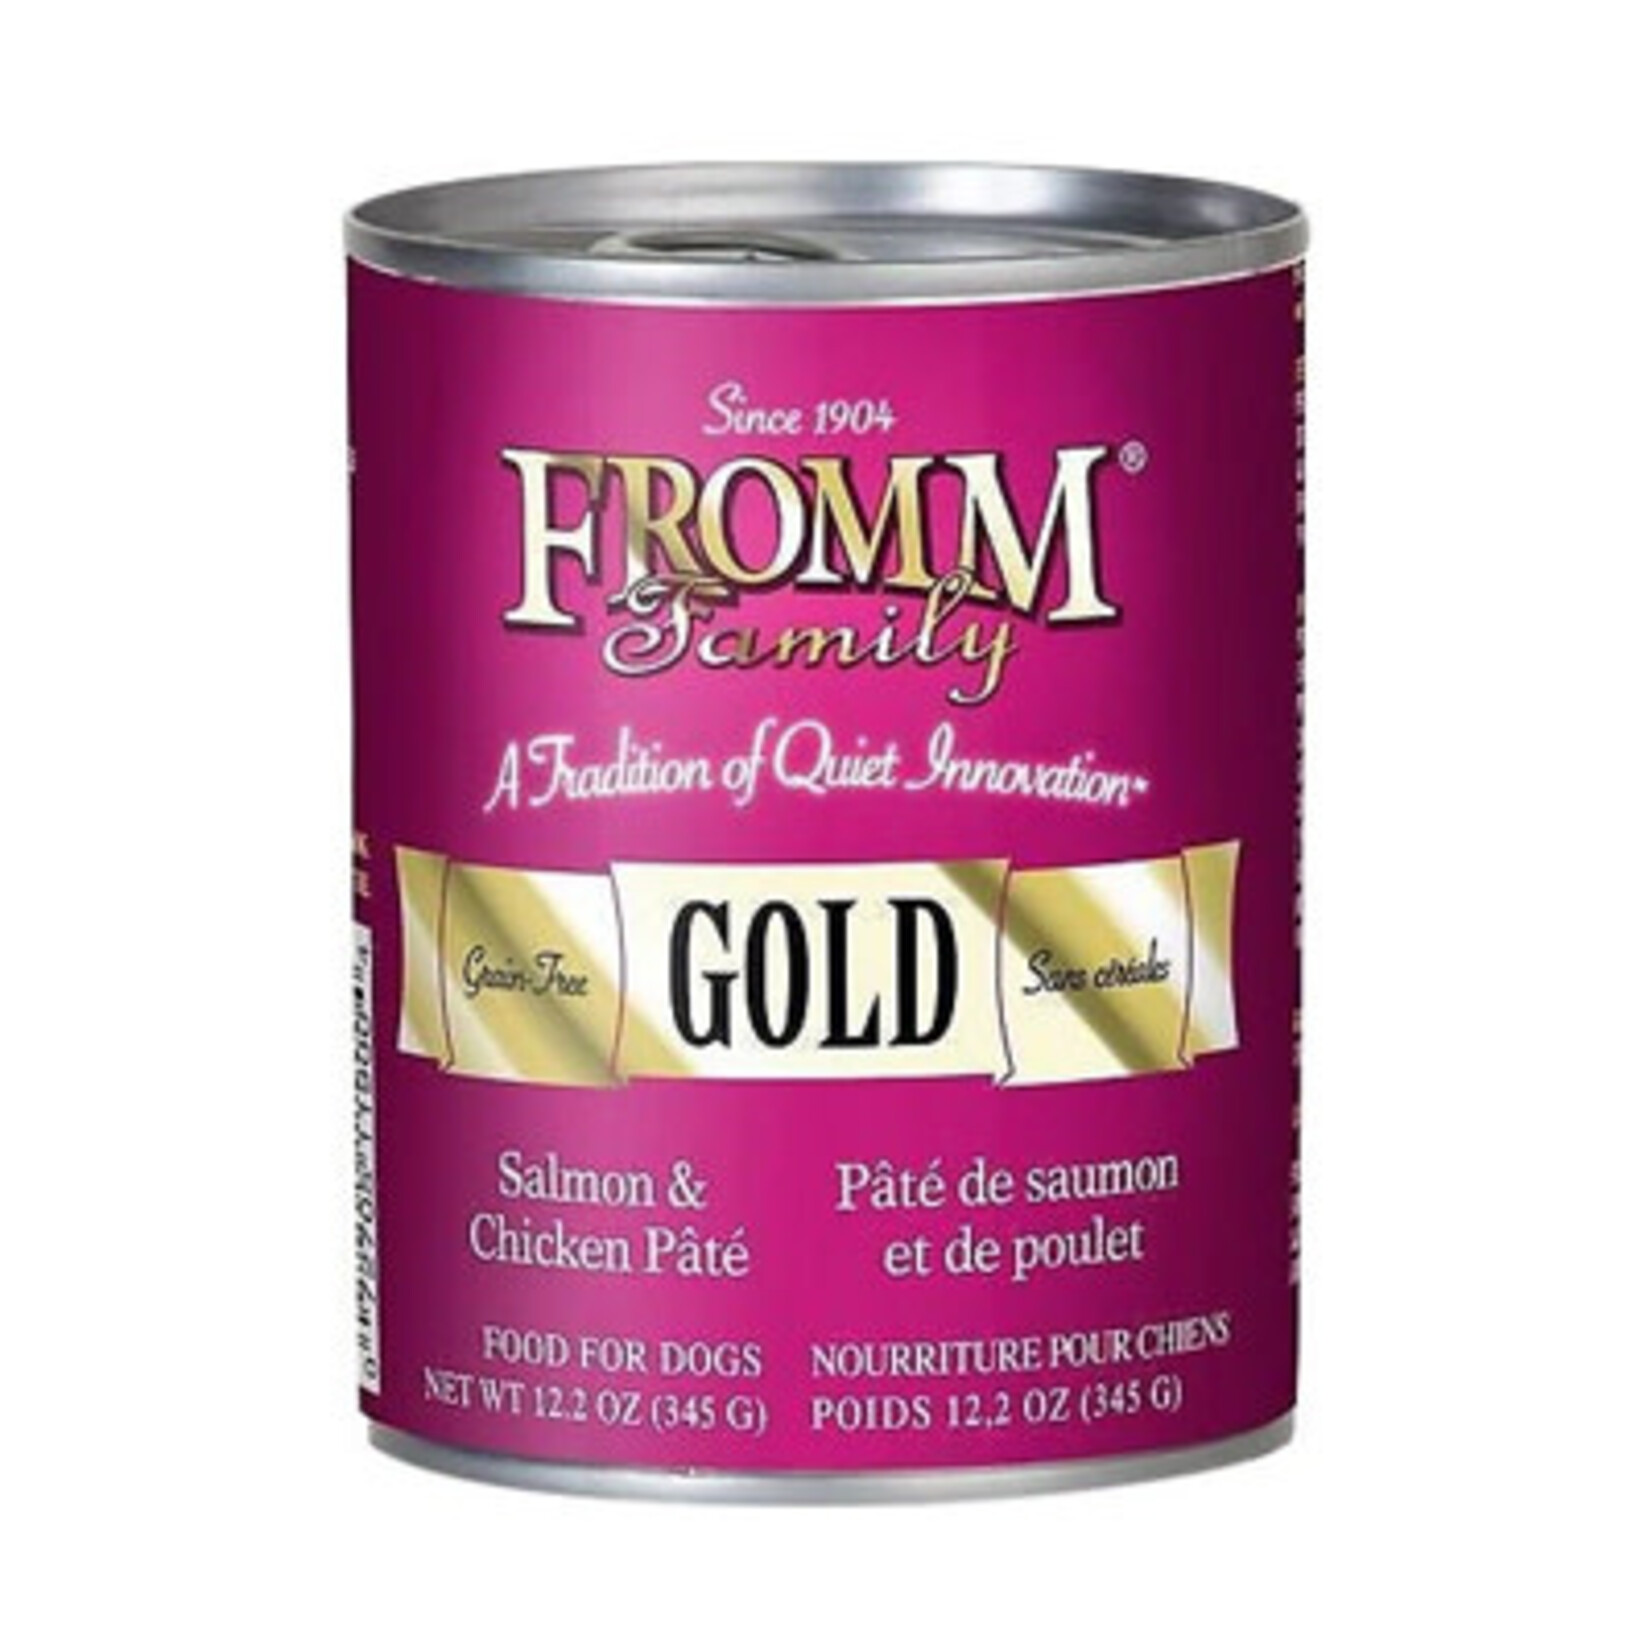 Fromm Fromm Pate 12.2oz Canned Dog Food